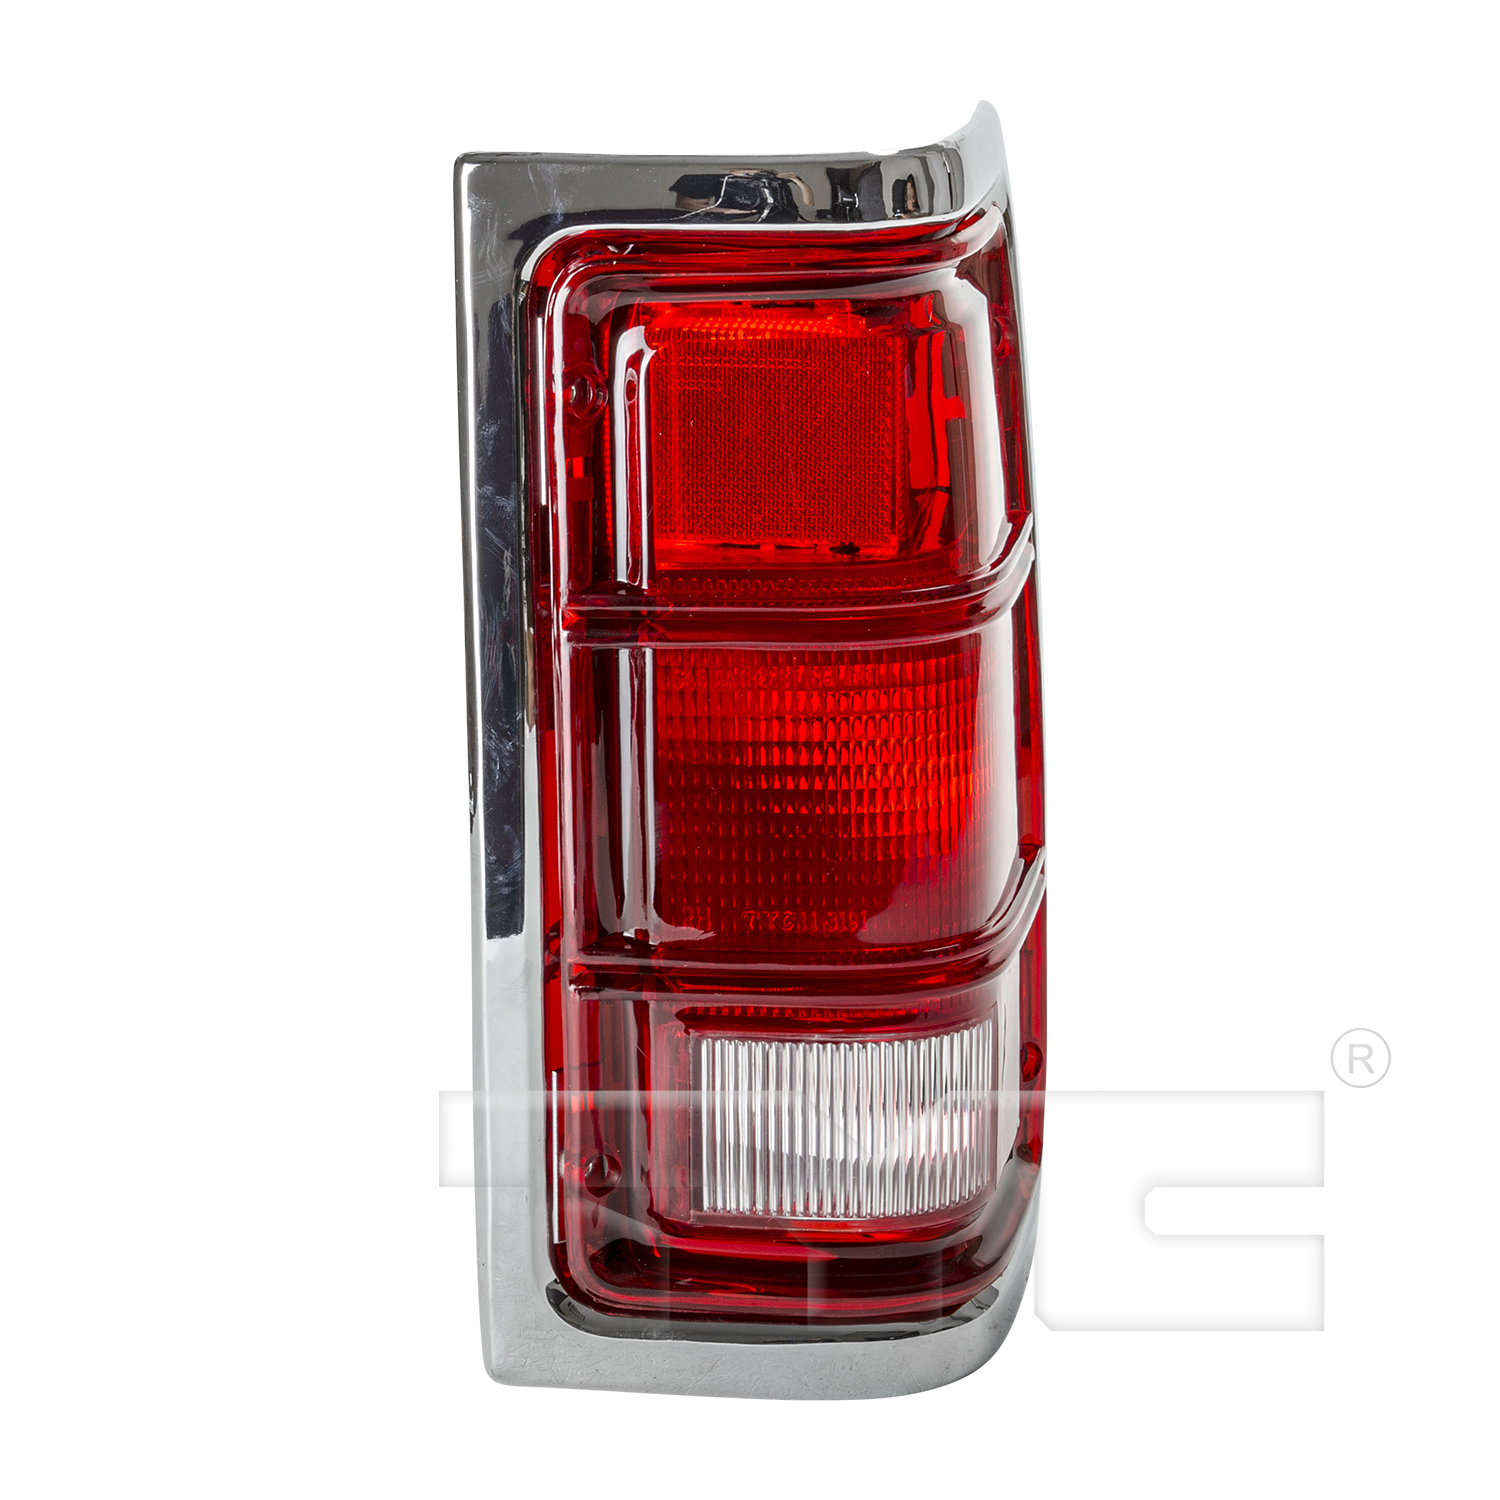 Aftermarket TAILLIGHTS for DODGE - W100, W100,87-89,RT Taillamp lens